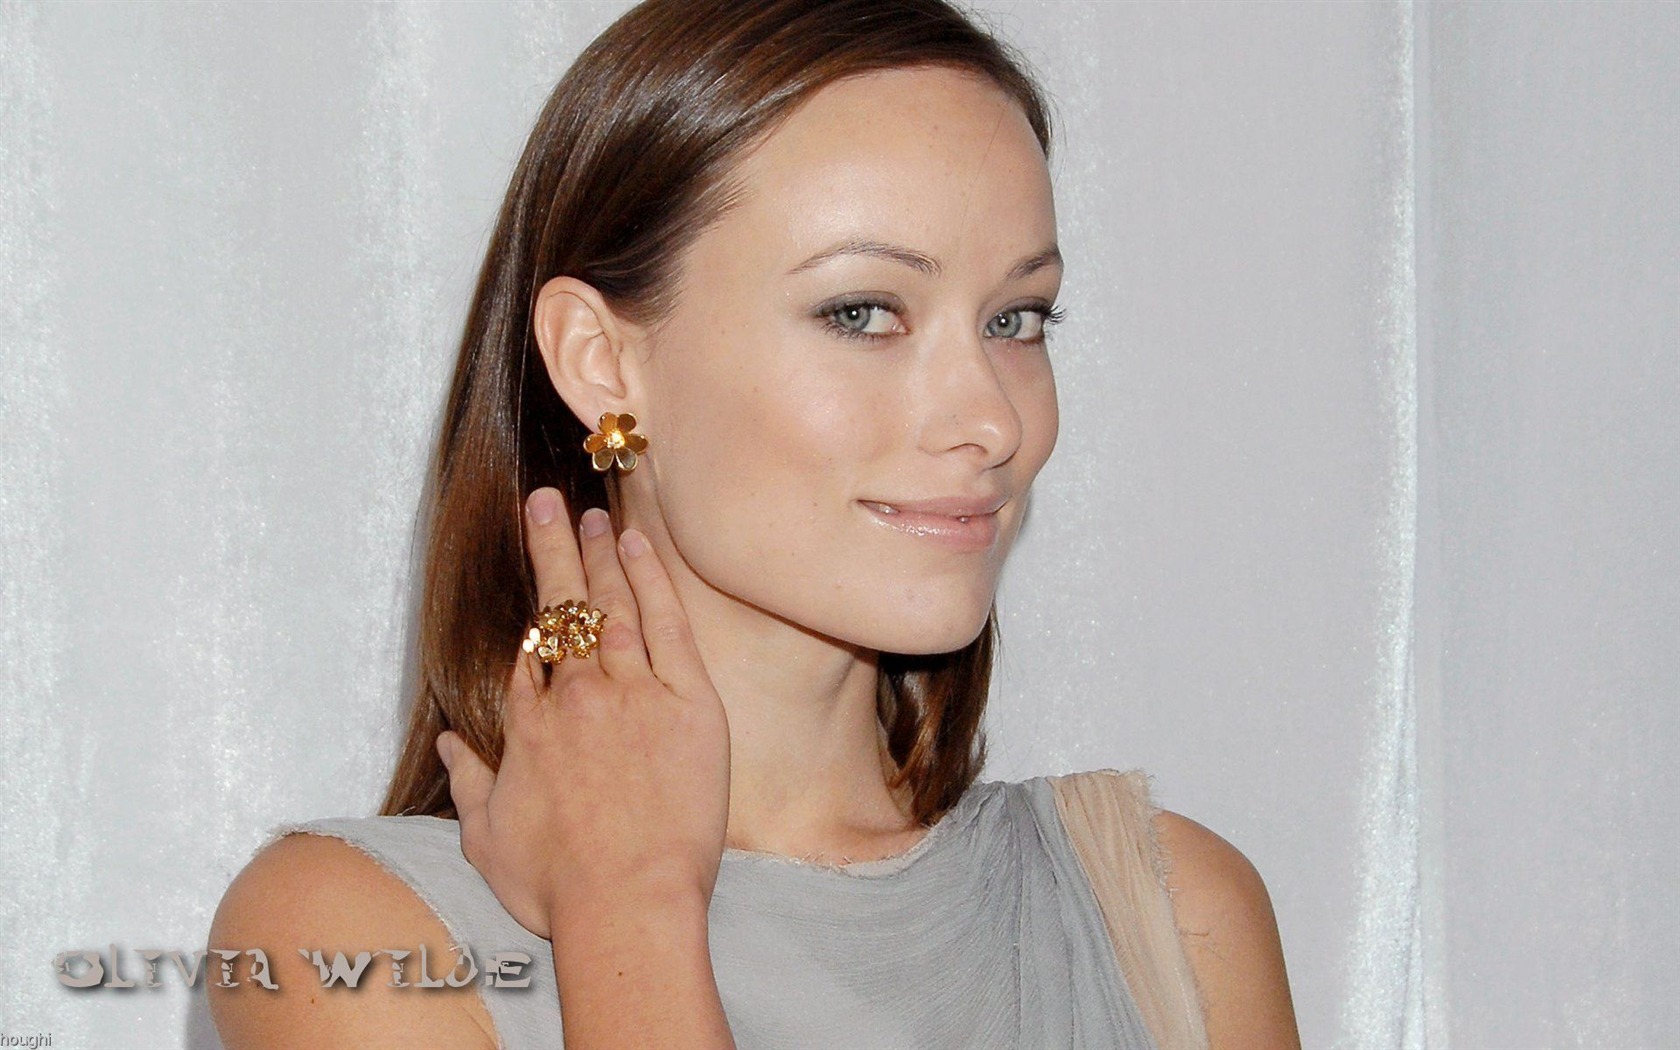 Olivia Wilde #046 - 1680x1050 Wallpapers Pictures Photos Images